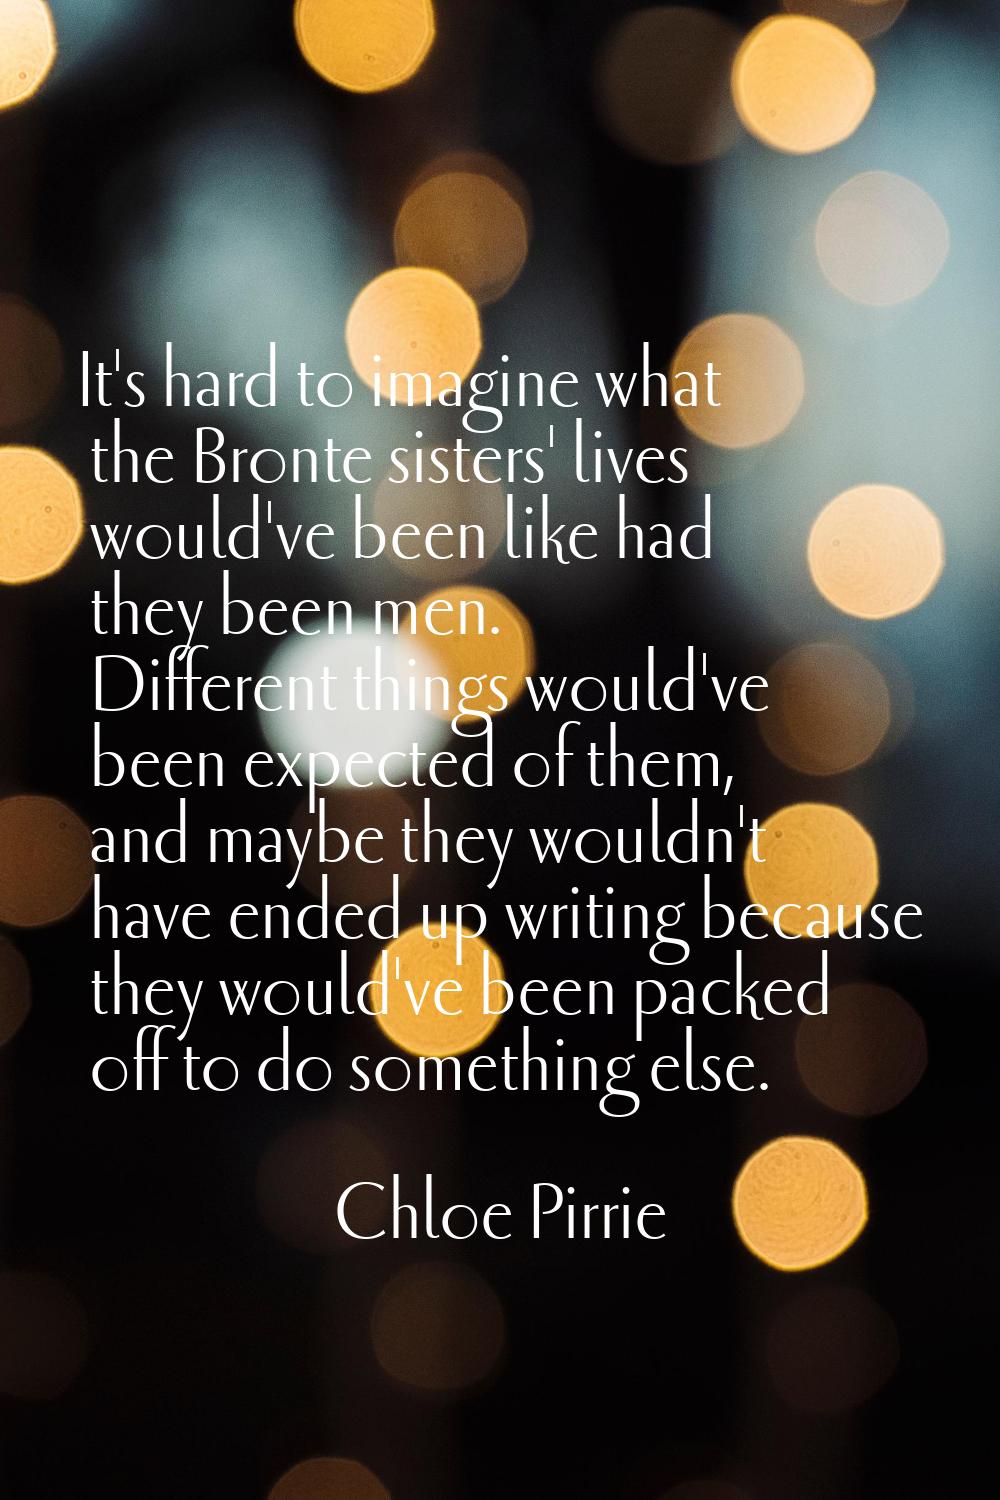 It's hard to imagine what the Bronte sisters' lives would've been like had they been men. Different